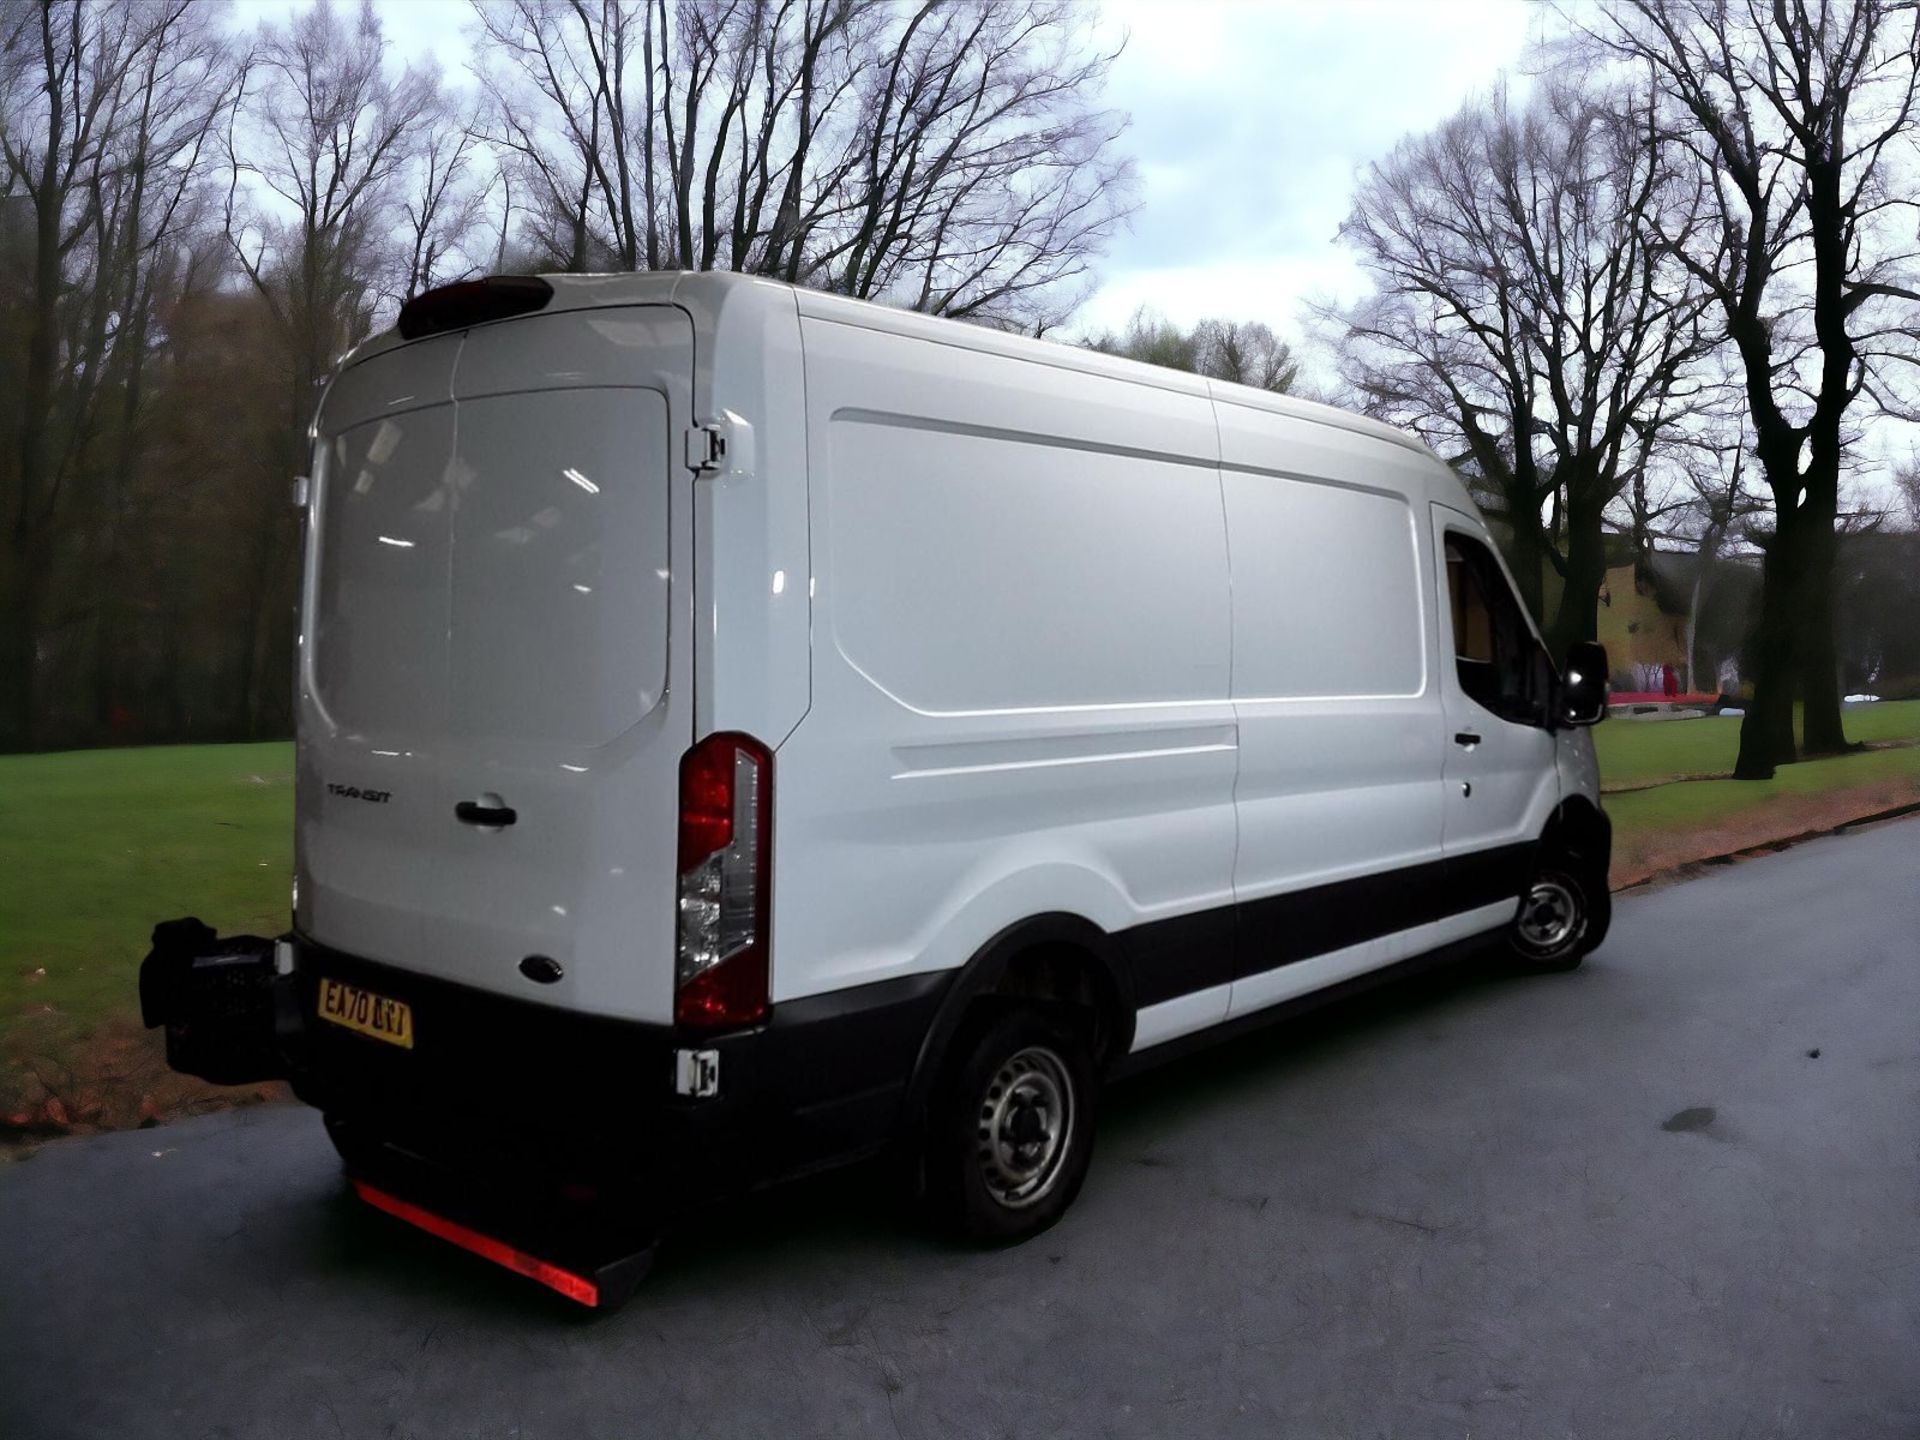 2020 FORD TRANSIT LWB L3H2 LEADER - RELIABLE AND WELL-EQUIPPED - Image 2 of 12